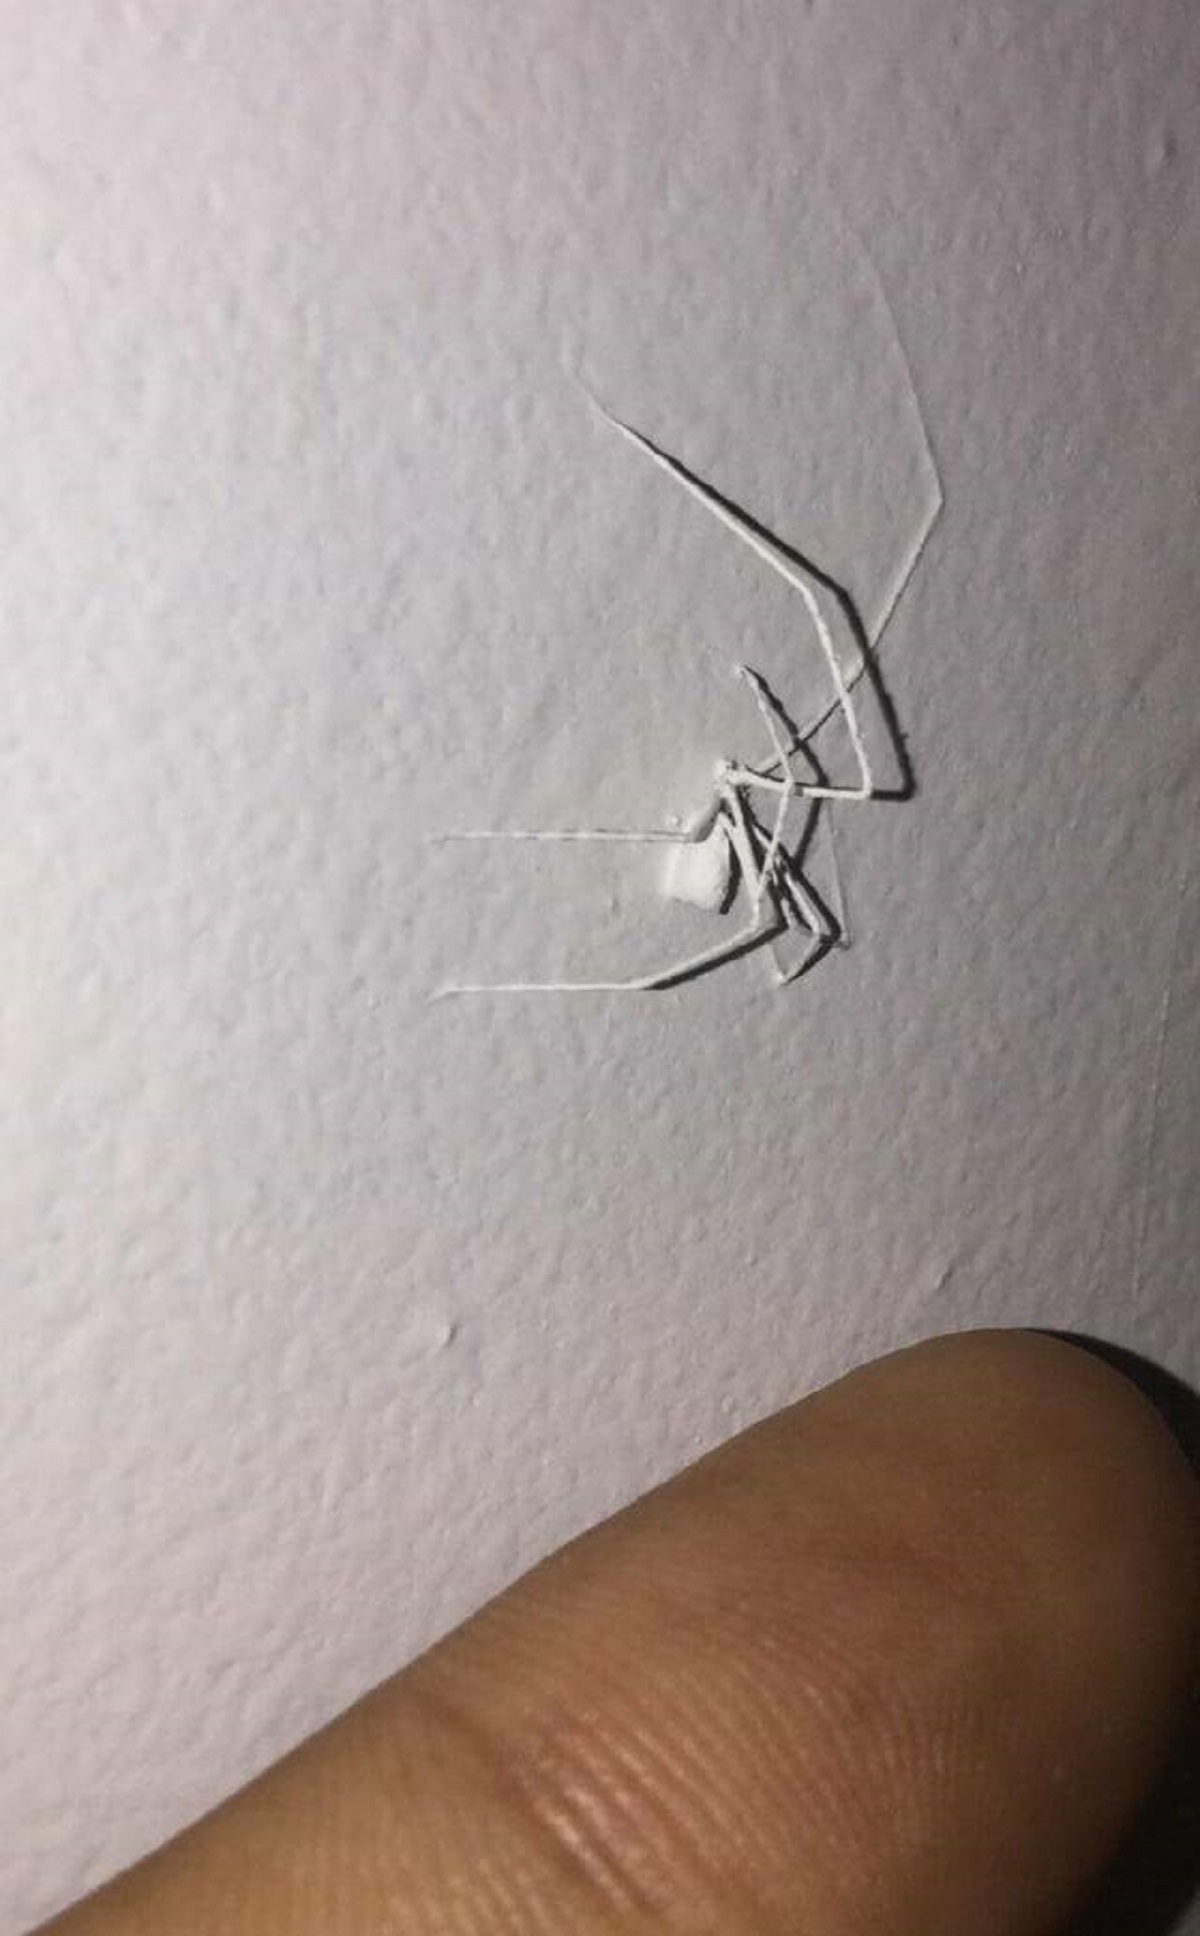 "Found a spider painted into a wall in my house"